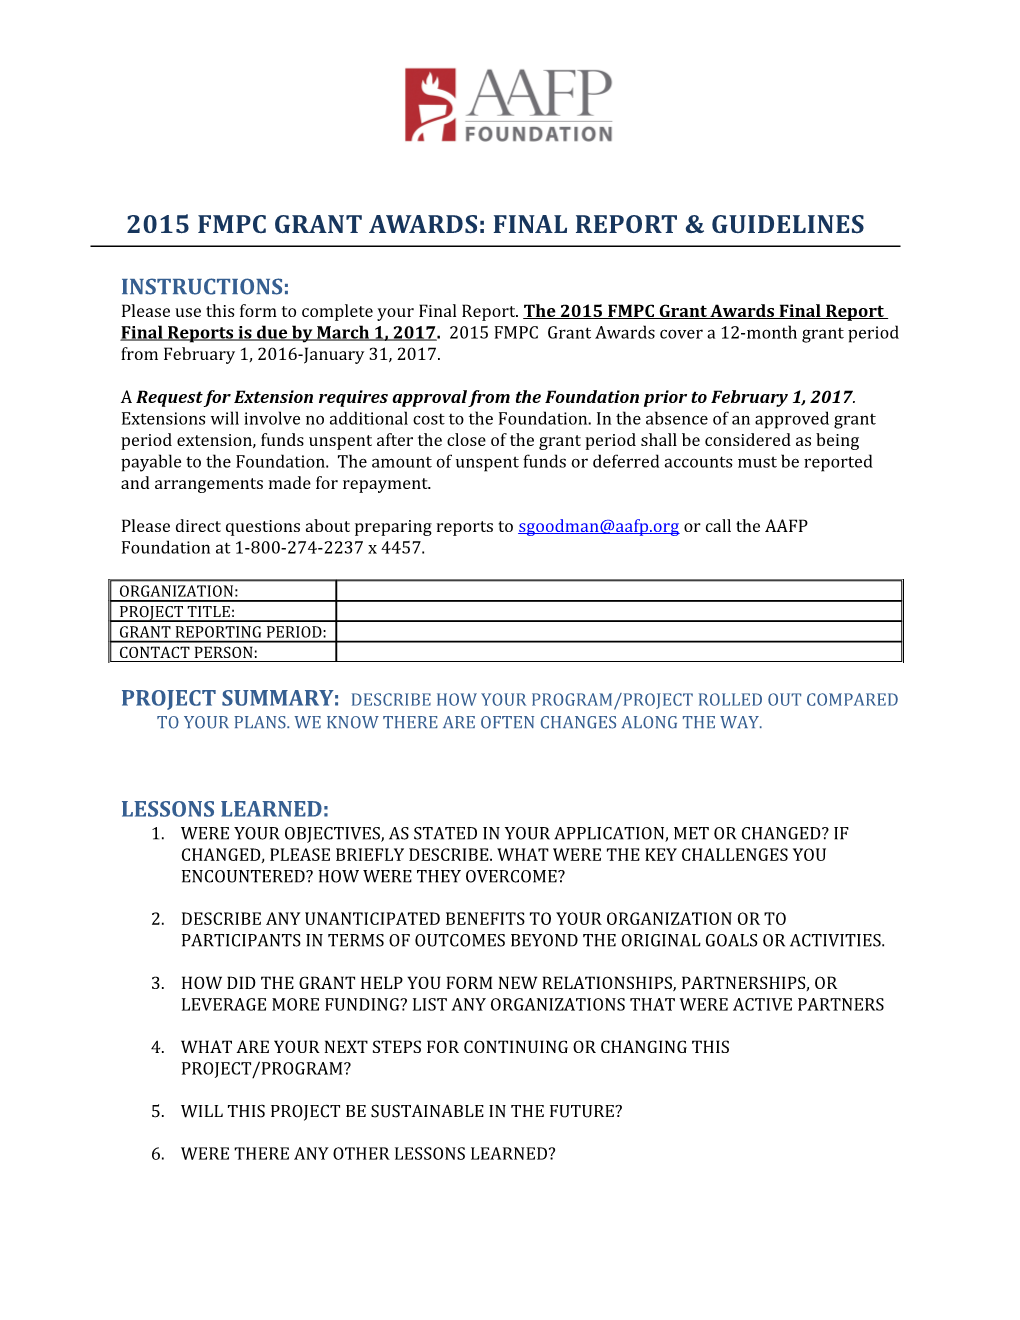 2015 Fmpc Grant Awards: Final Report & Guidelines